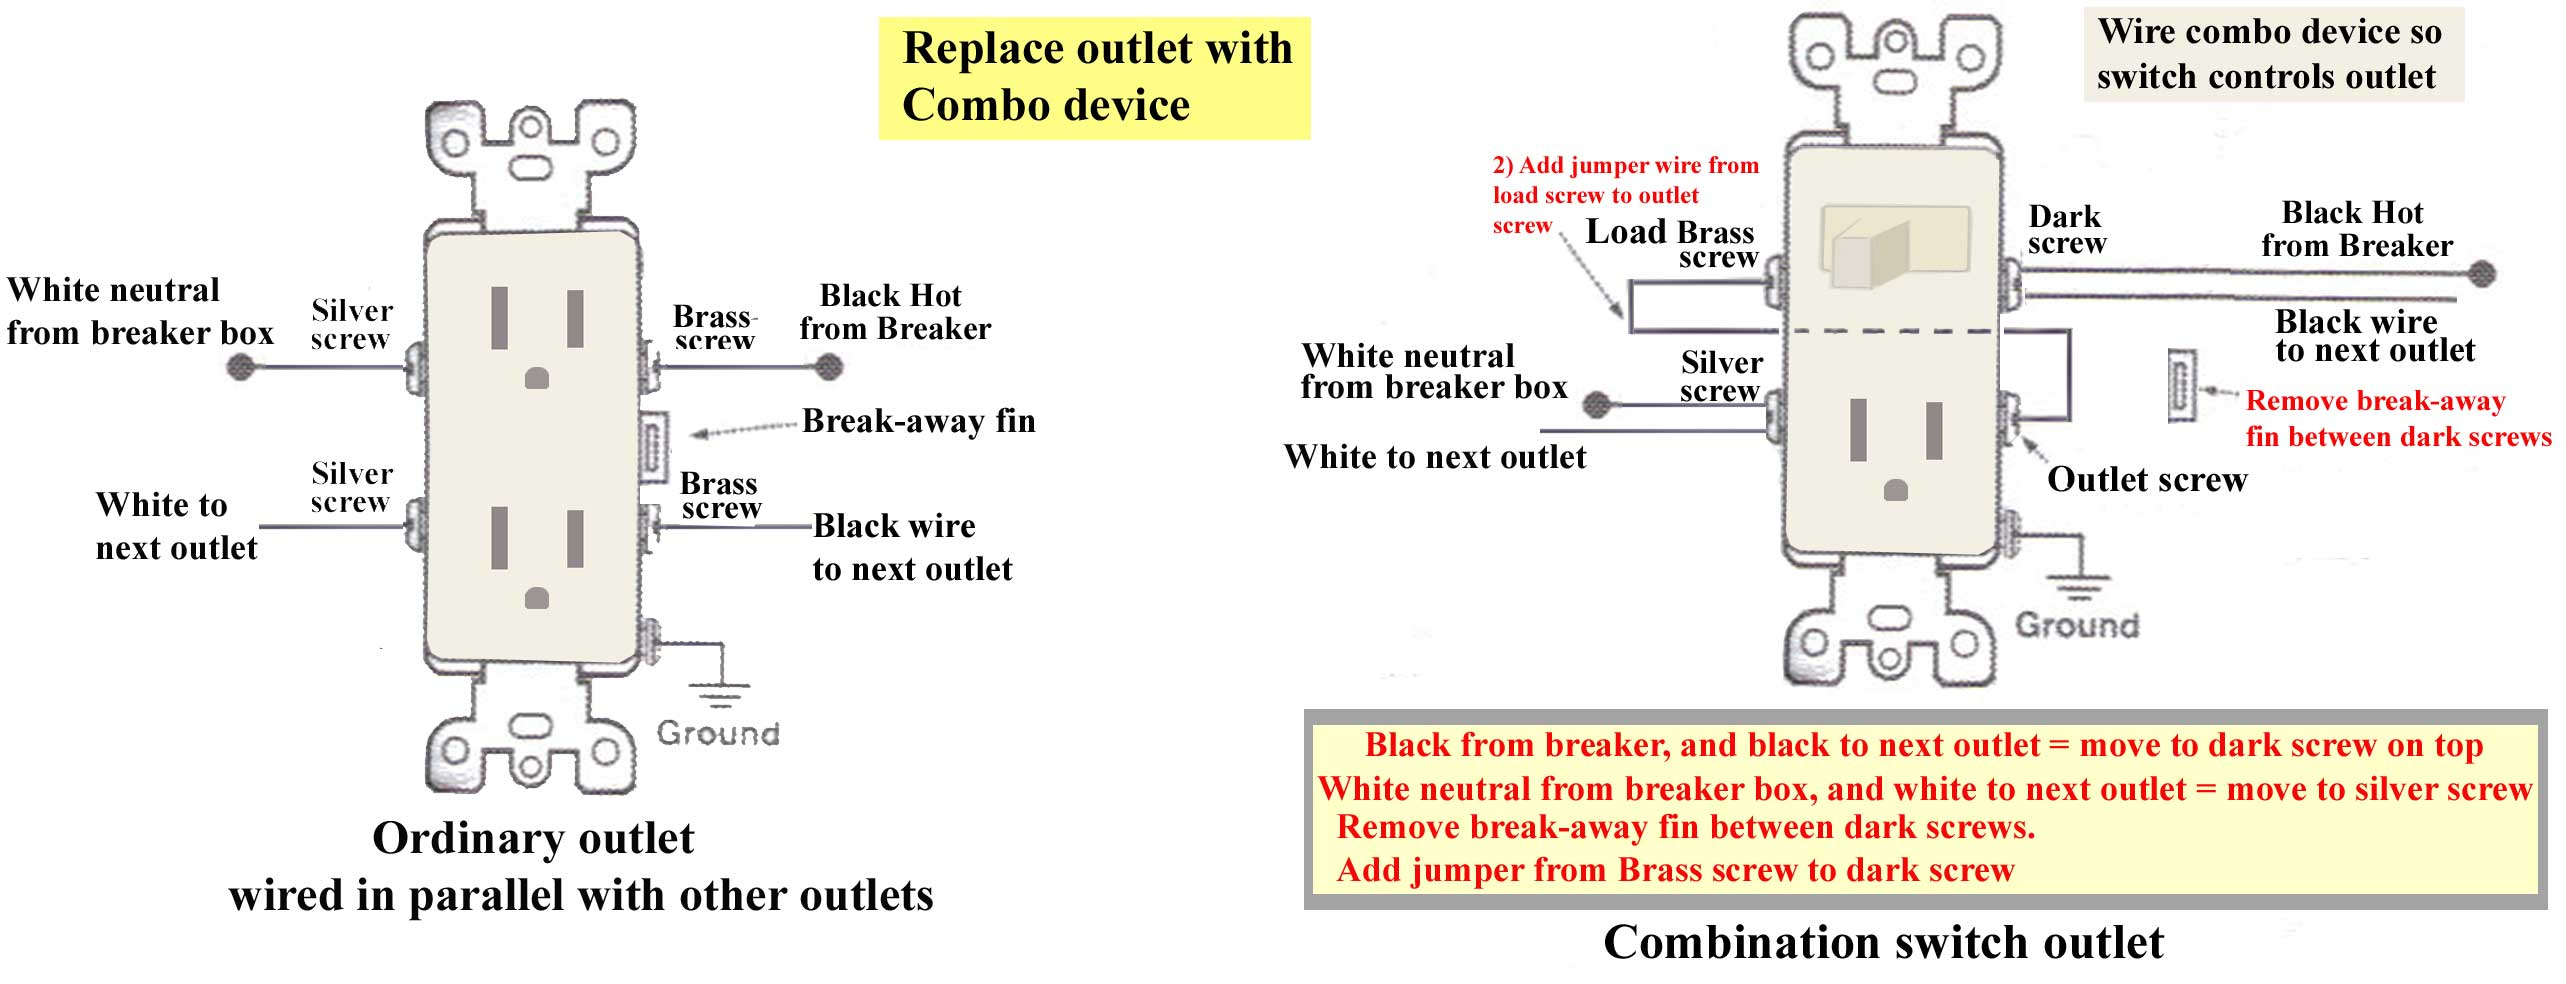 How To Wire Combination Switch Outlet - Switched Outlet Wiring Diagram